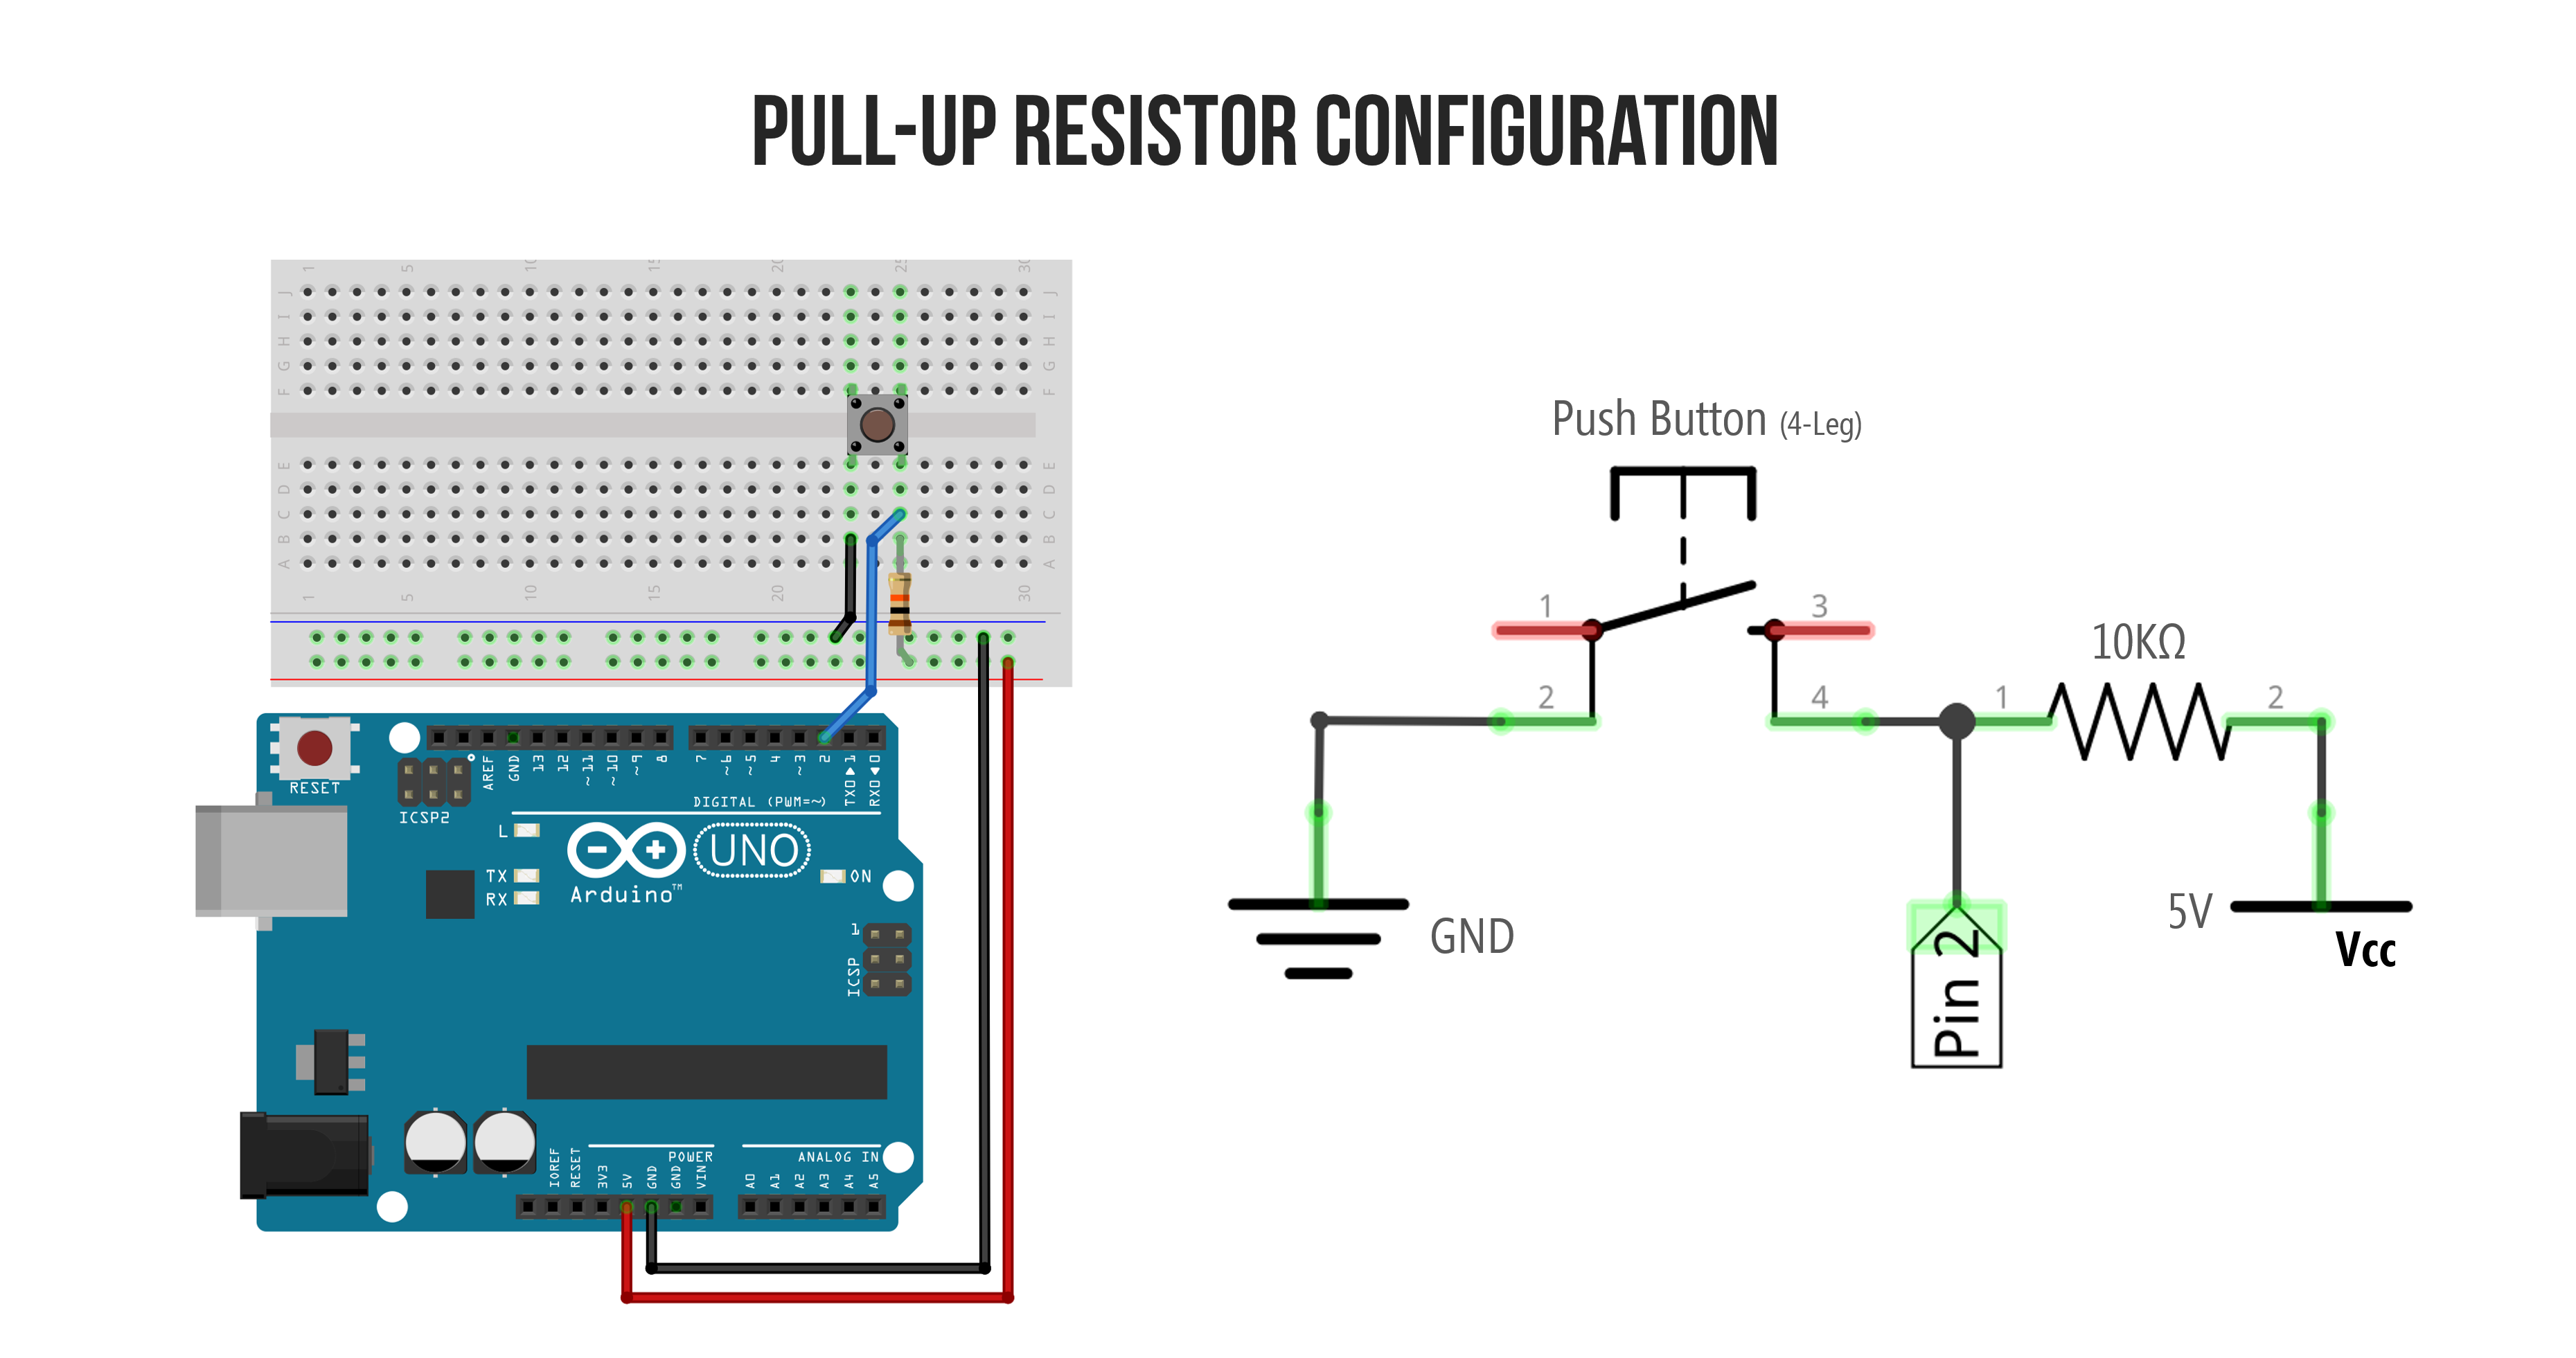 Wiring diagram and schematic for a button with a pull-up resistor wired to digital I/O Pin 2